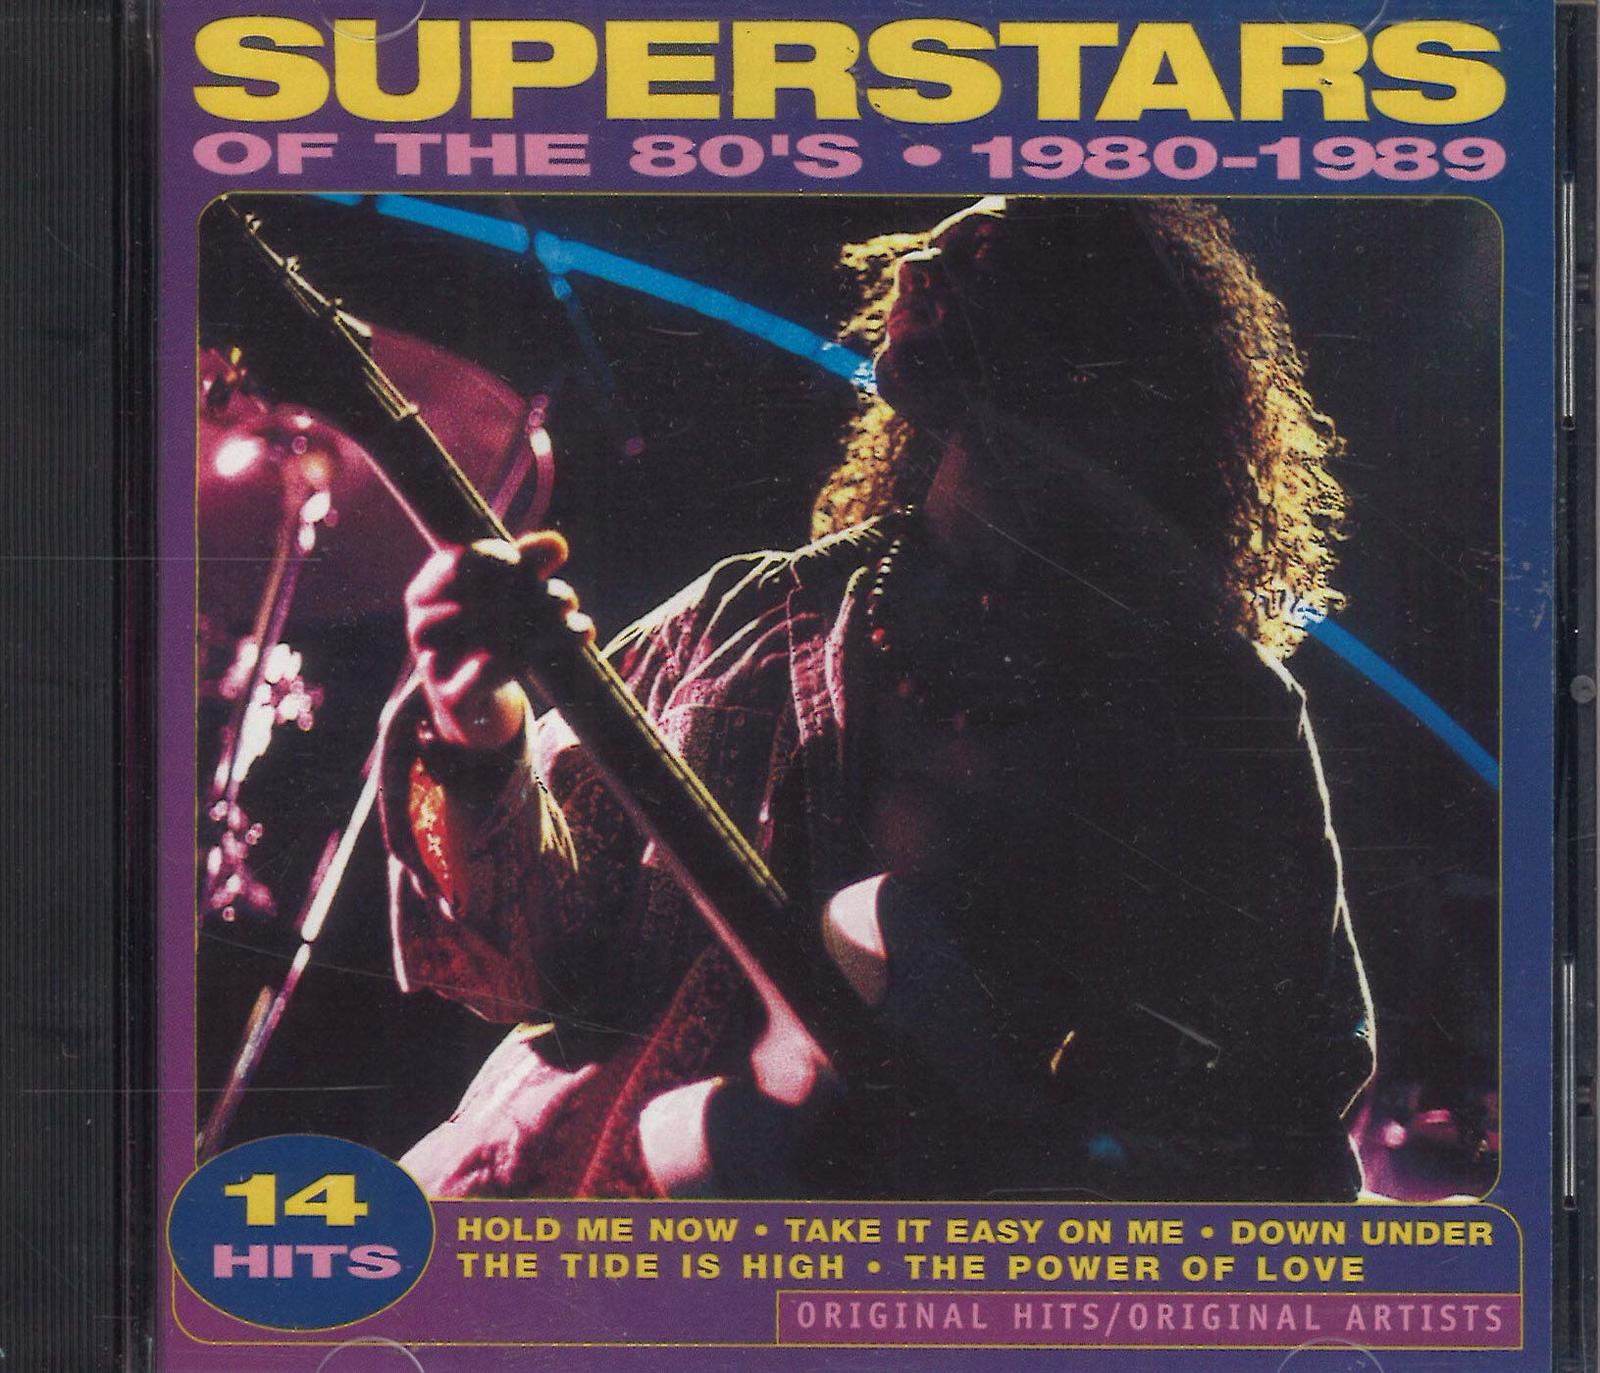 Primary image for Superstars of the 80's: 1980-1989 [Audio CD] Various Artists